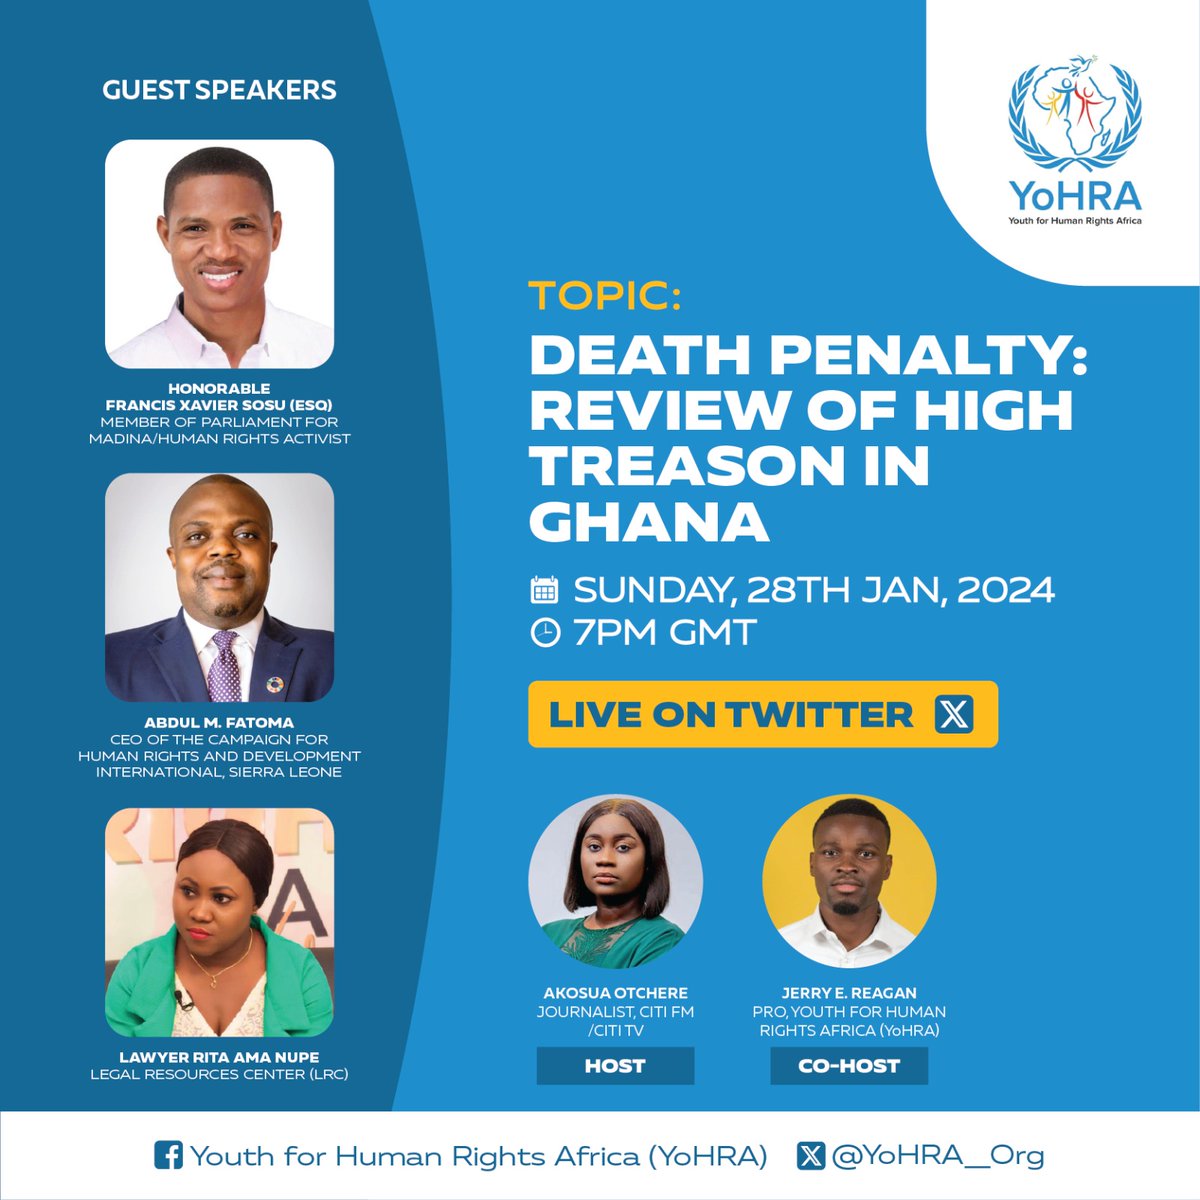 Unpacking Ghana's recent court decision to sentence six people to death. Let's engage in a thought-provoking dialogue on justice, human rights, and the way forward. Your voice matters! 
#YoHRA
#GhanaJustice #HumanRightsDialogue 🗣️✨